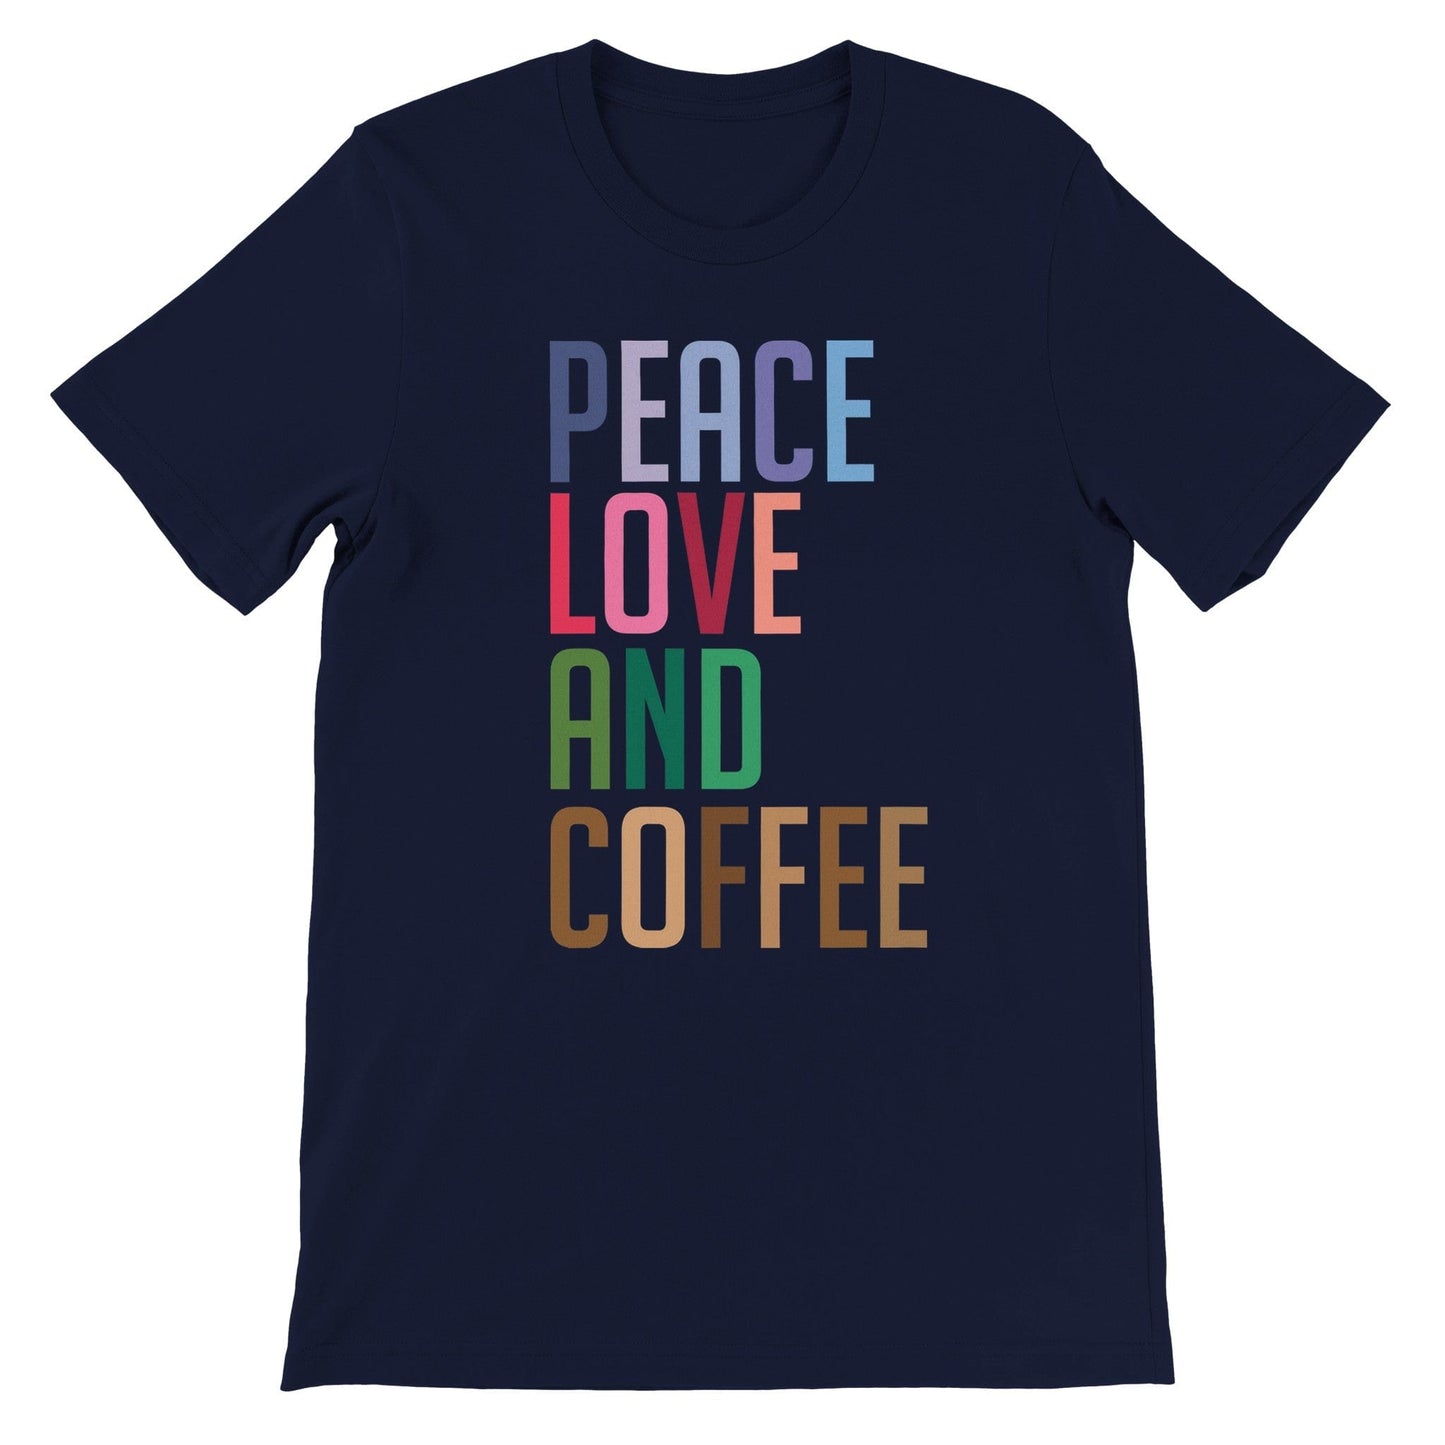 Good Bean Gifts "Peace Love and Coffee" - Unisex Crewneck T-shirt Navy / S